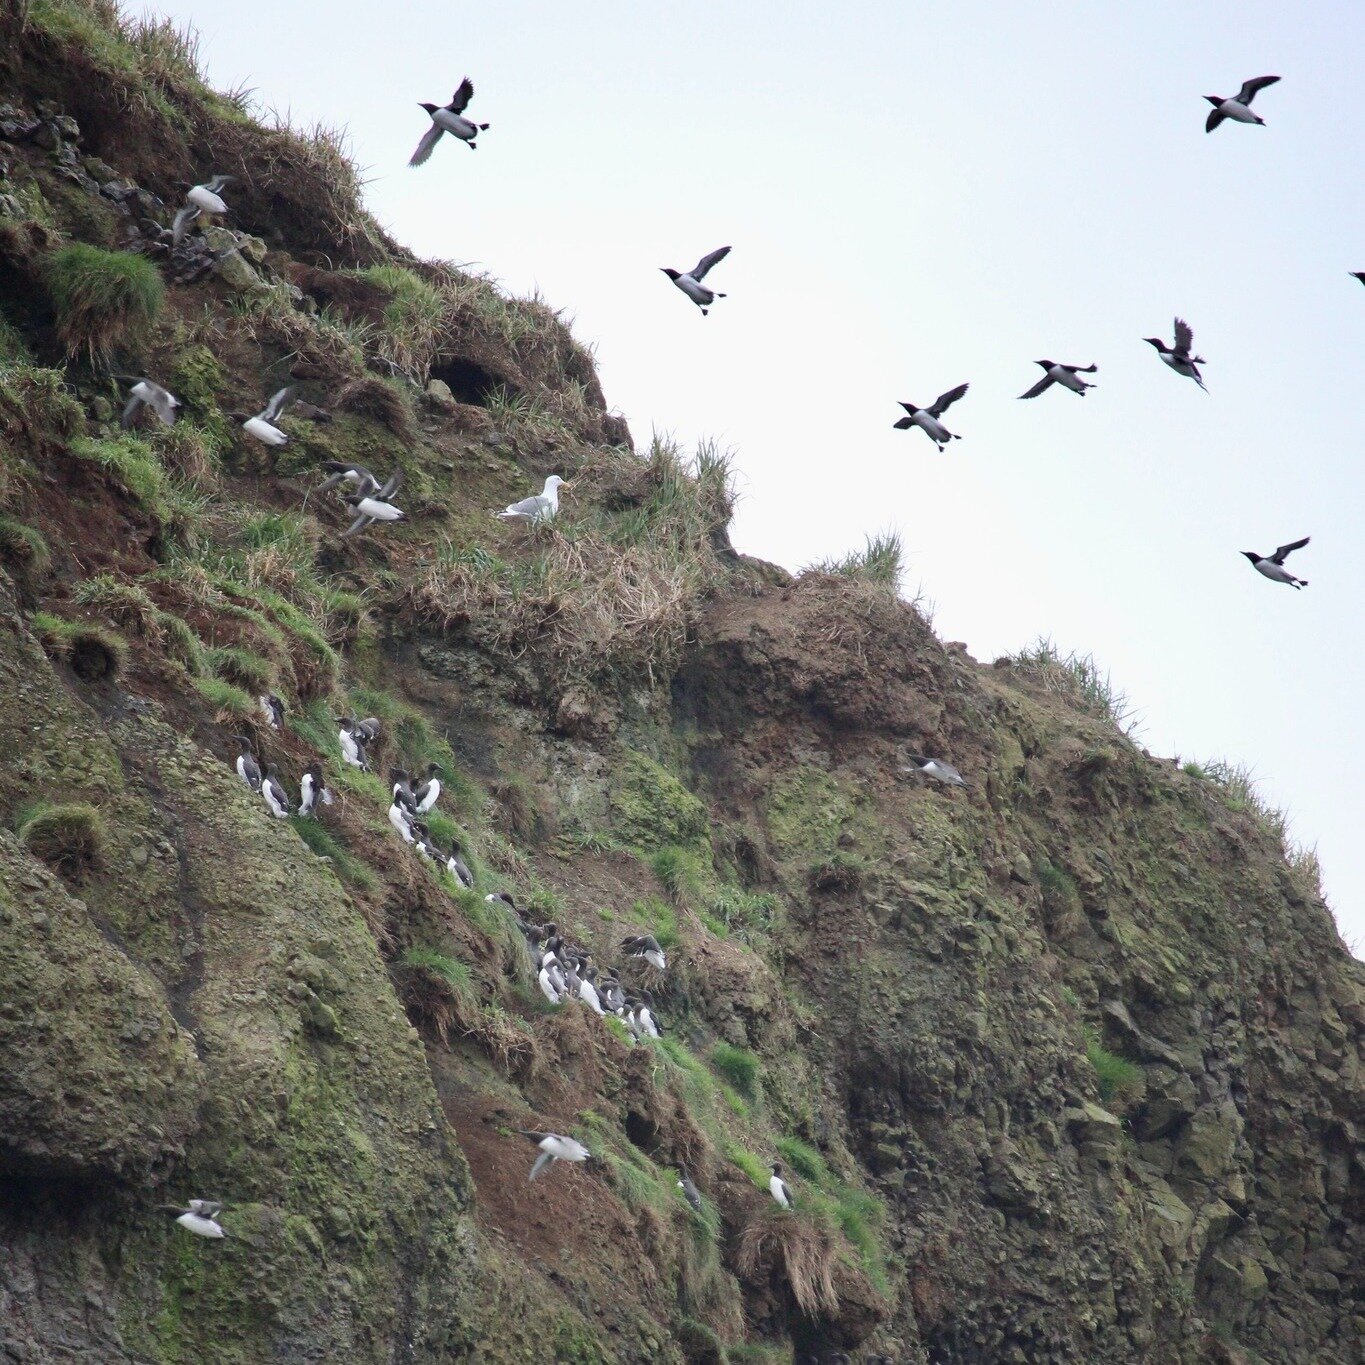 Common murres (Uria aalge) have been spotted at the rock 🪨 over the past few weeks, which means nesting season 🪺is right around the corner! Historically, they arrive in March to scope out the nesting grounds before settling in April. 

Many visitor